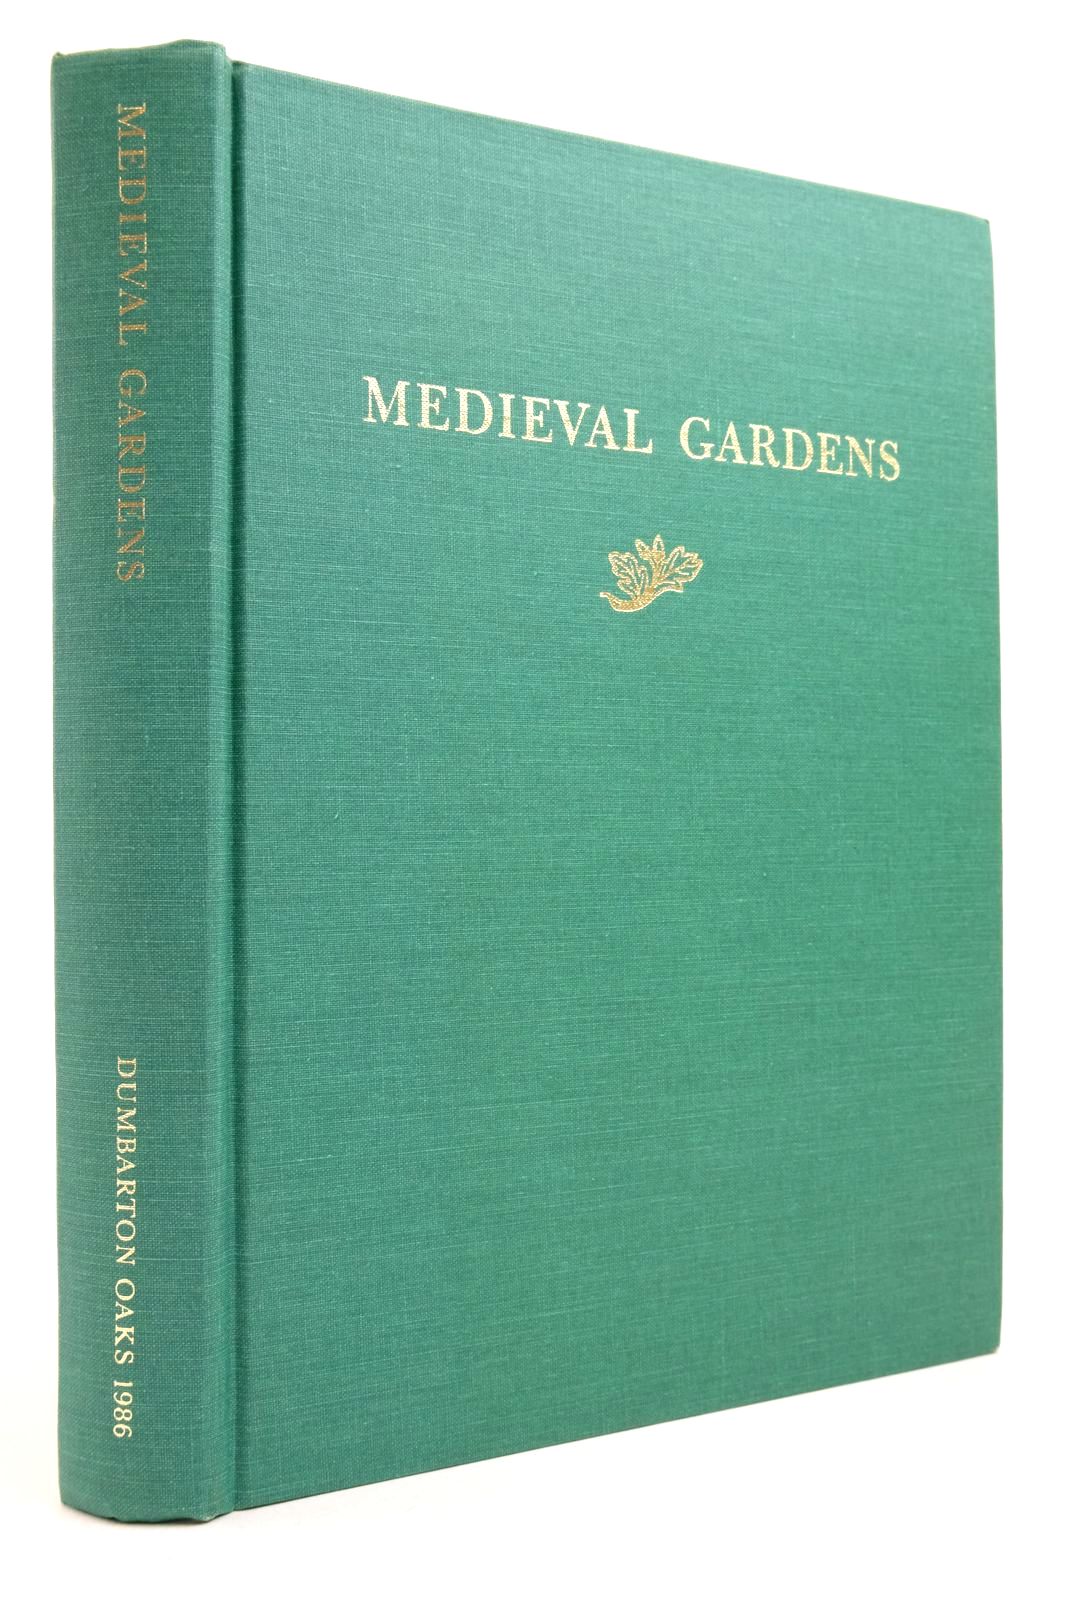 Photo of MEDIEVAL GARDENS written by Colvin, Howard Meyvaert, Paul Keil, Paul Stannard, Jerry et al, published by Dumbarton Oaks (STOCK CODE: 2138889)  for sale by Stella & Rose's Books